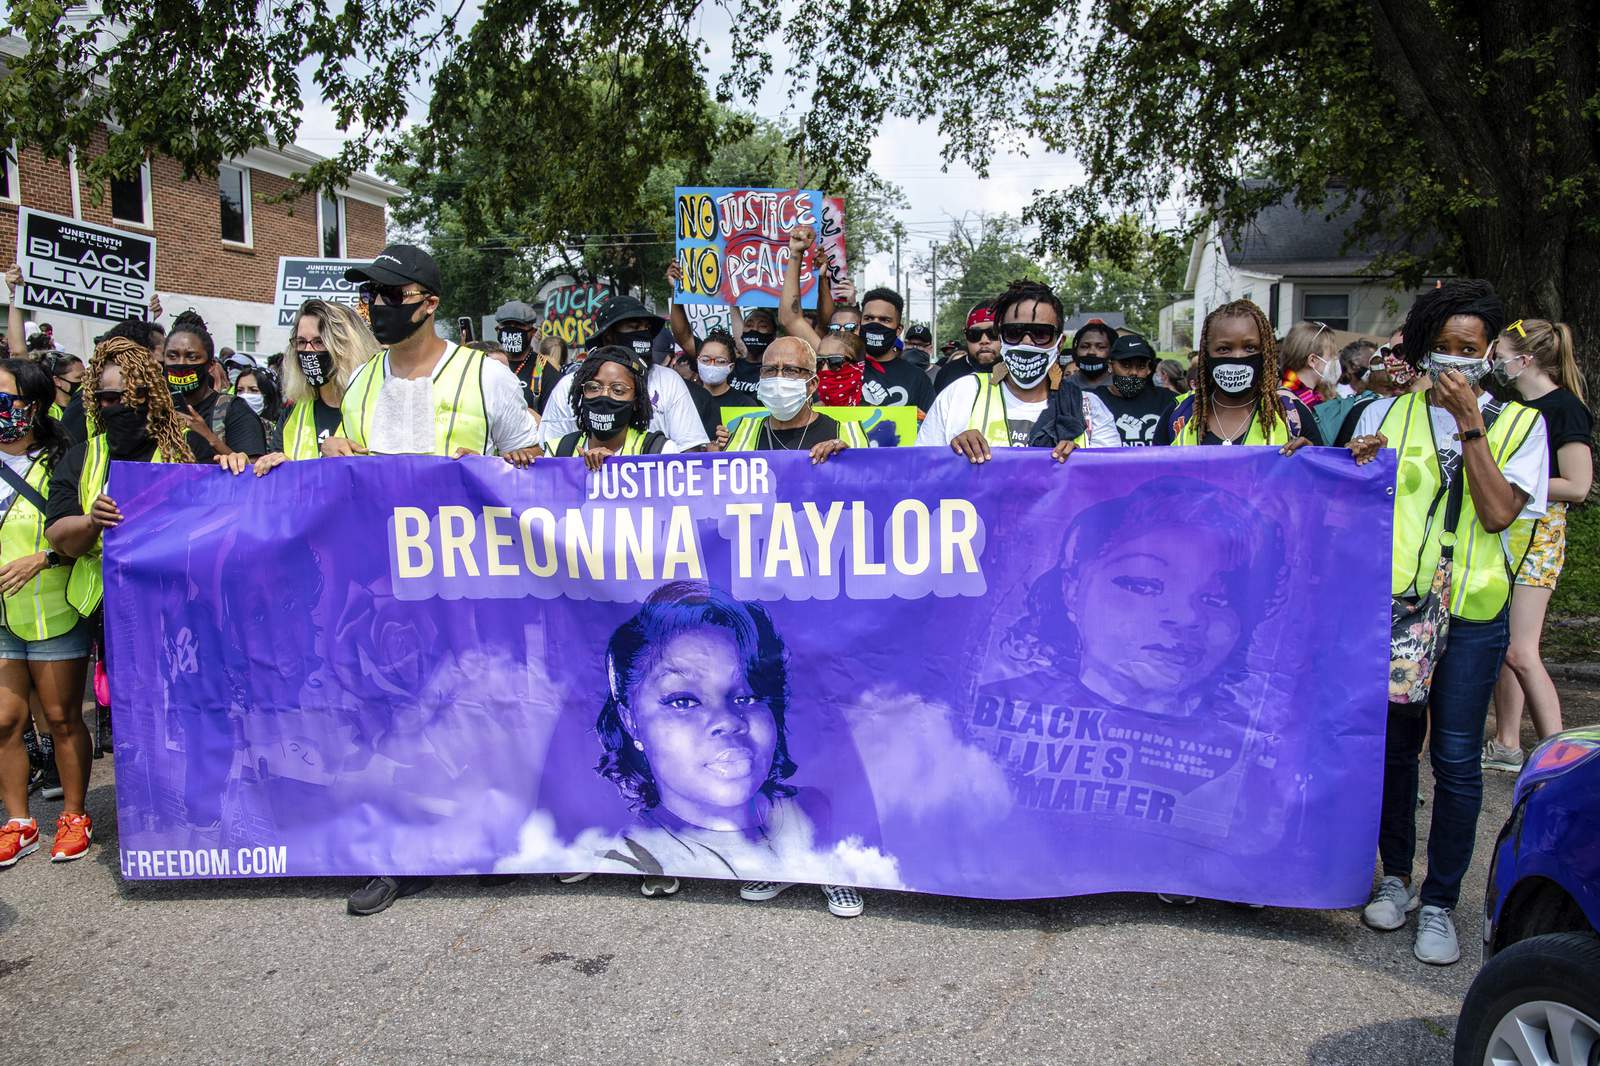 A timeline of events related to the death of Breonna Taylor